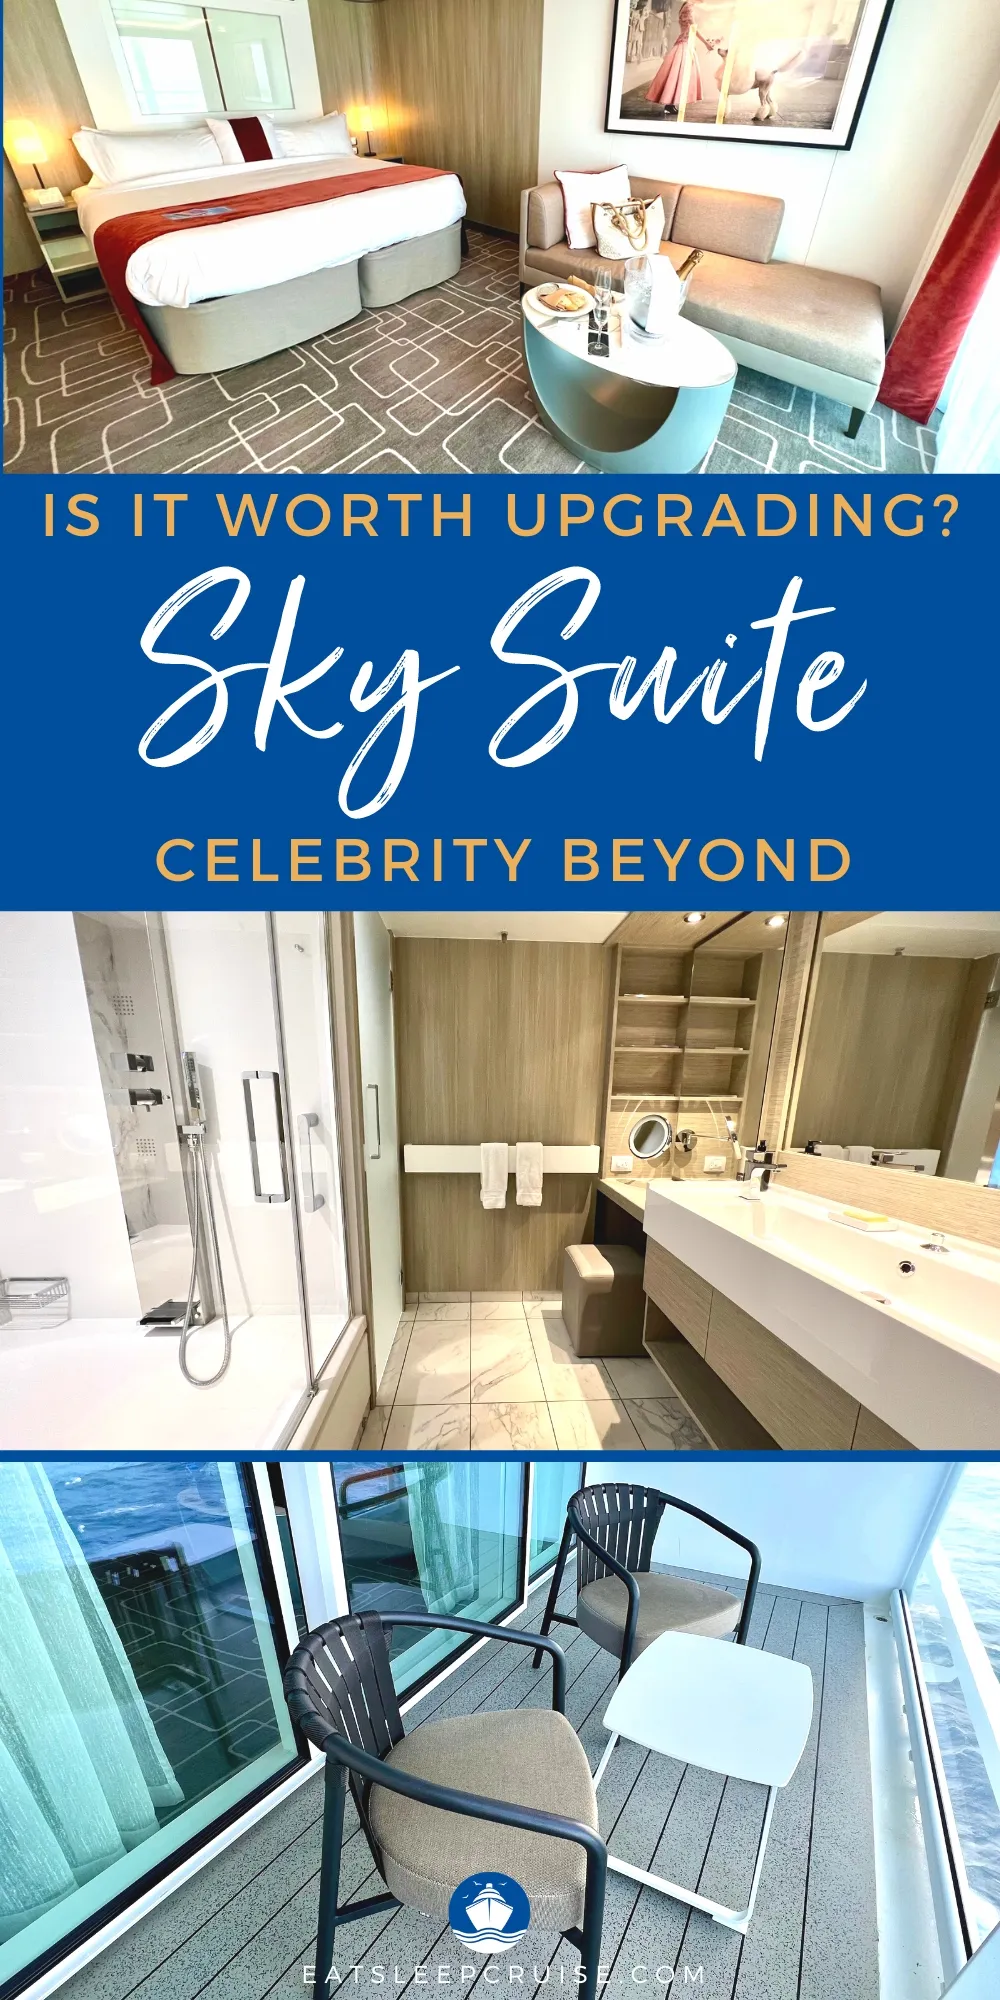 We Tested Out the Celebrity Beyond Sky Suite - Was it Worth the Upgrade?